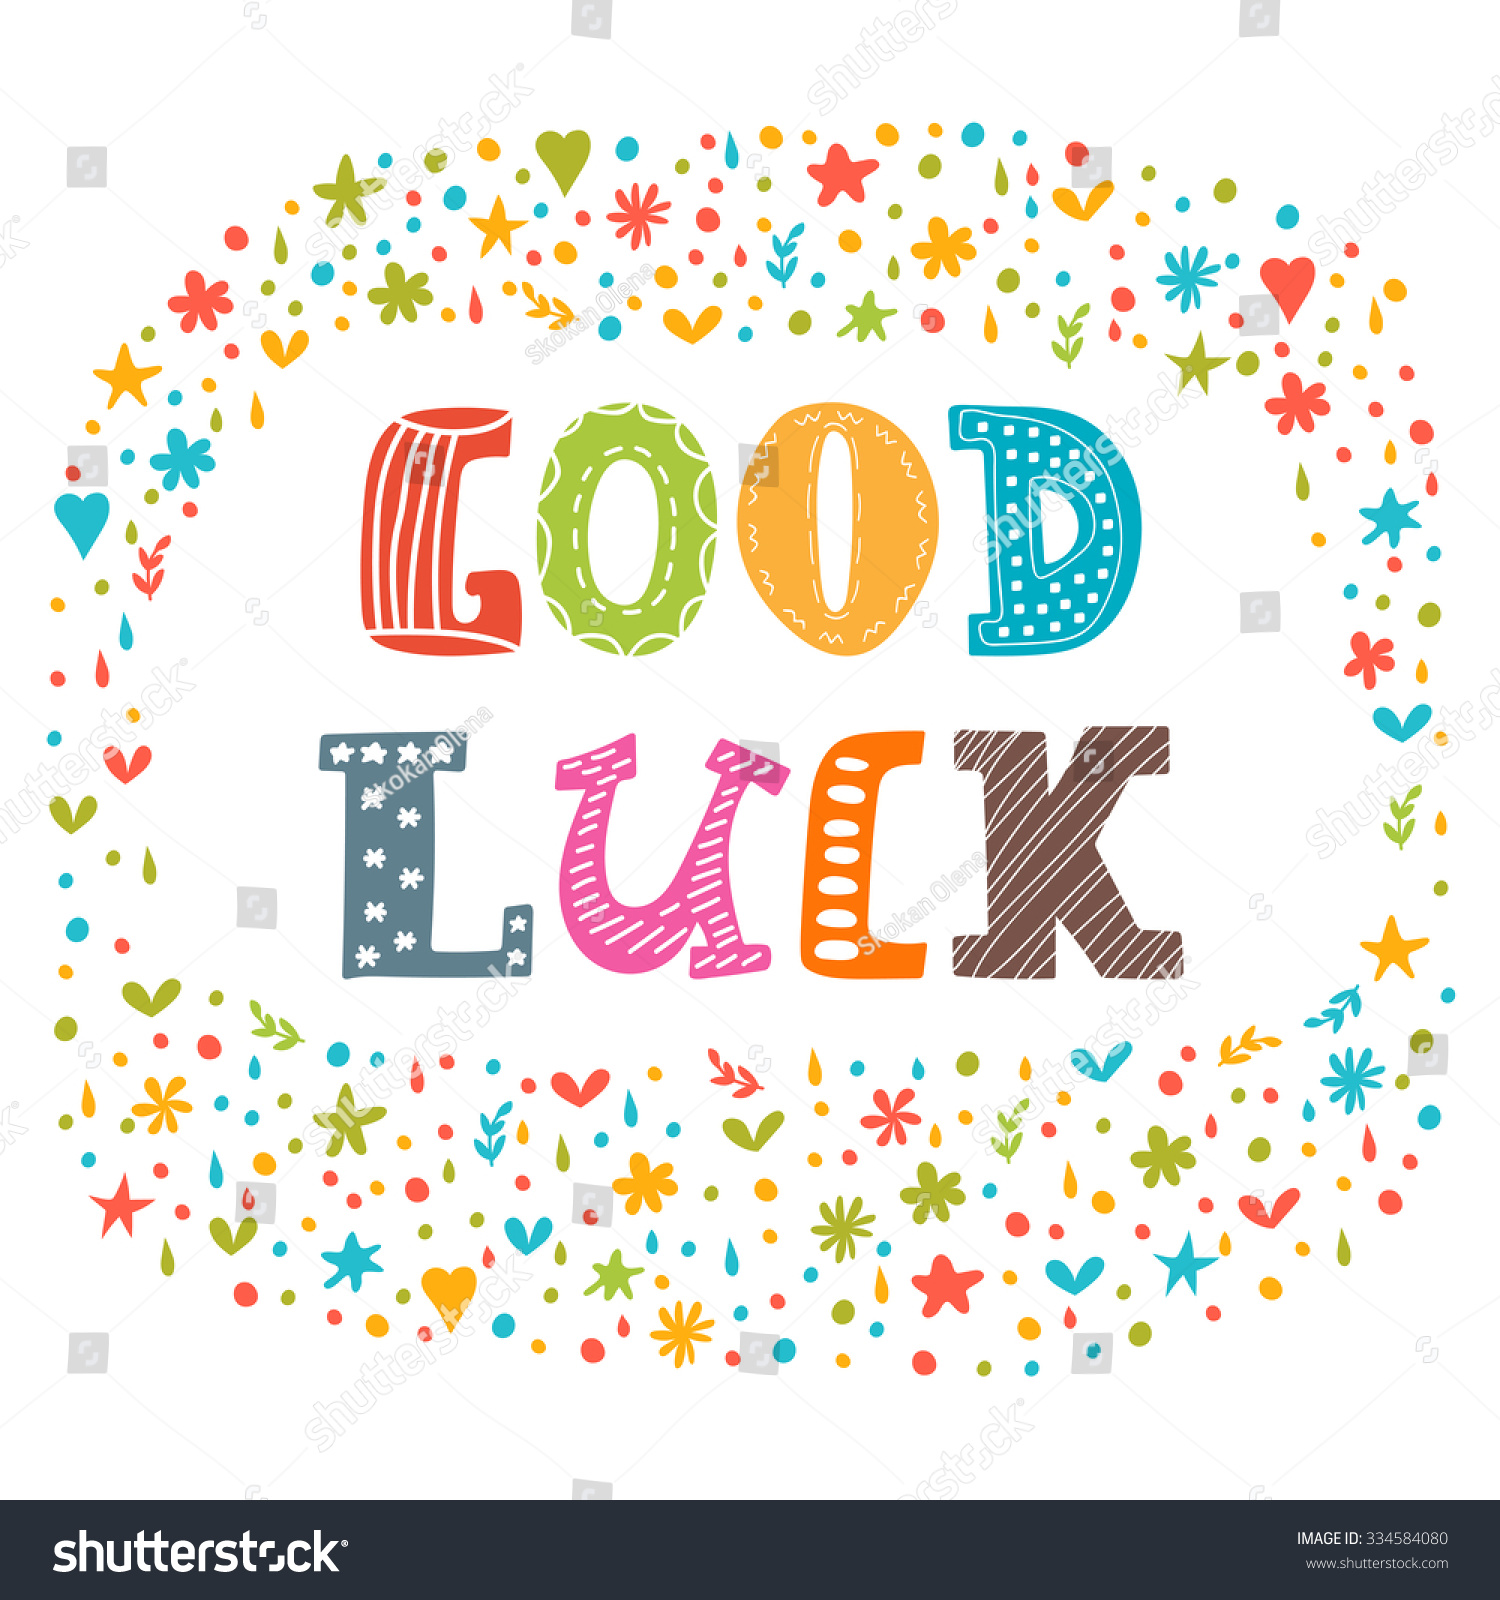 free clipart images good luck - photo #19